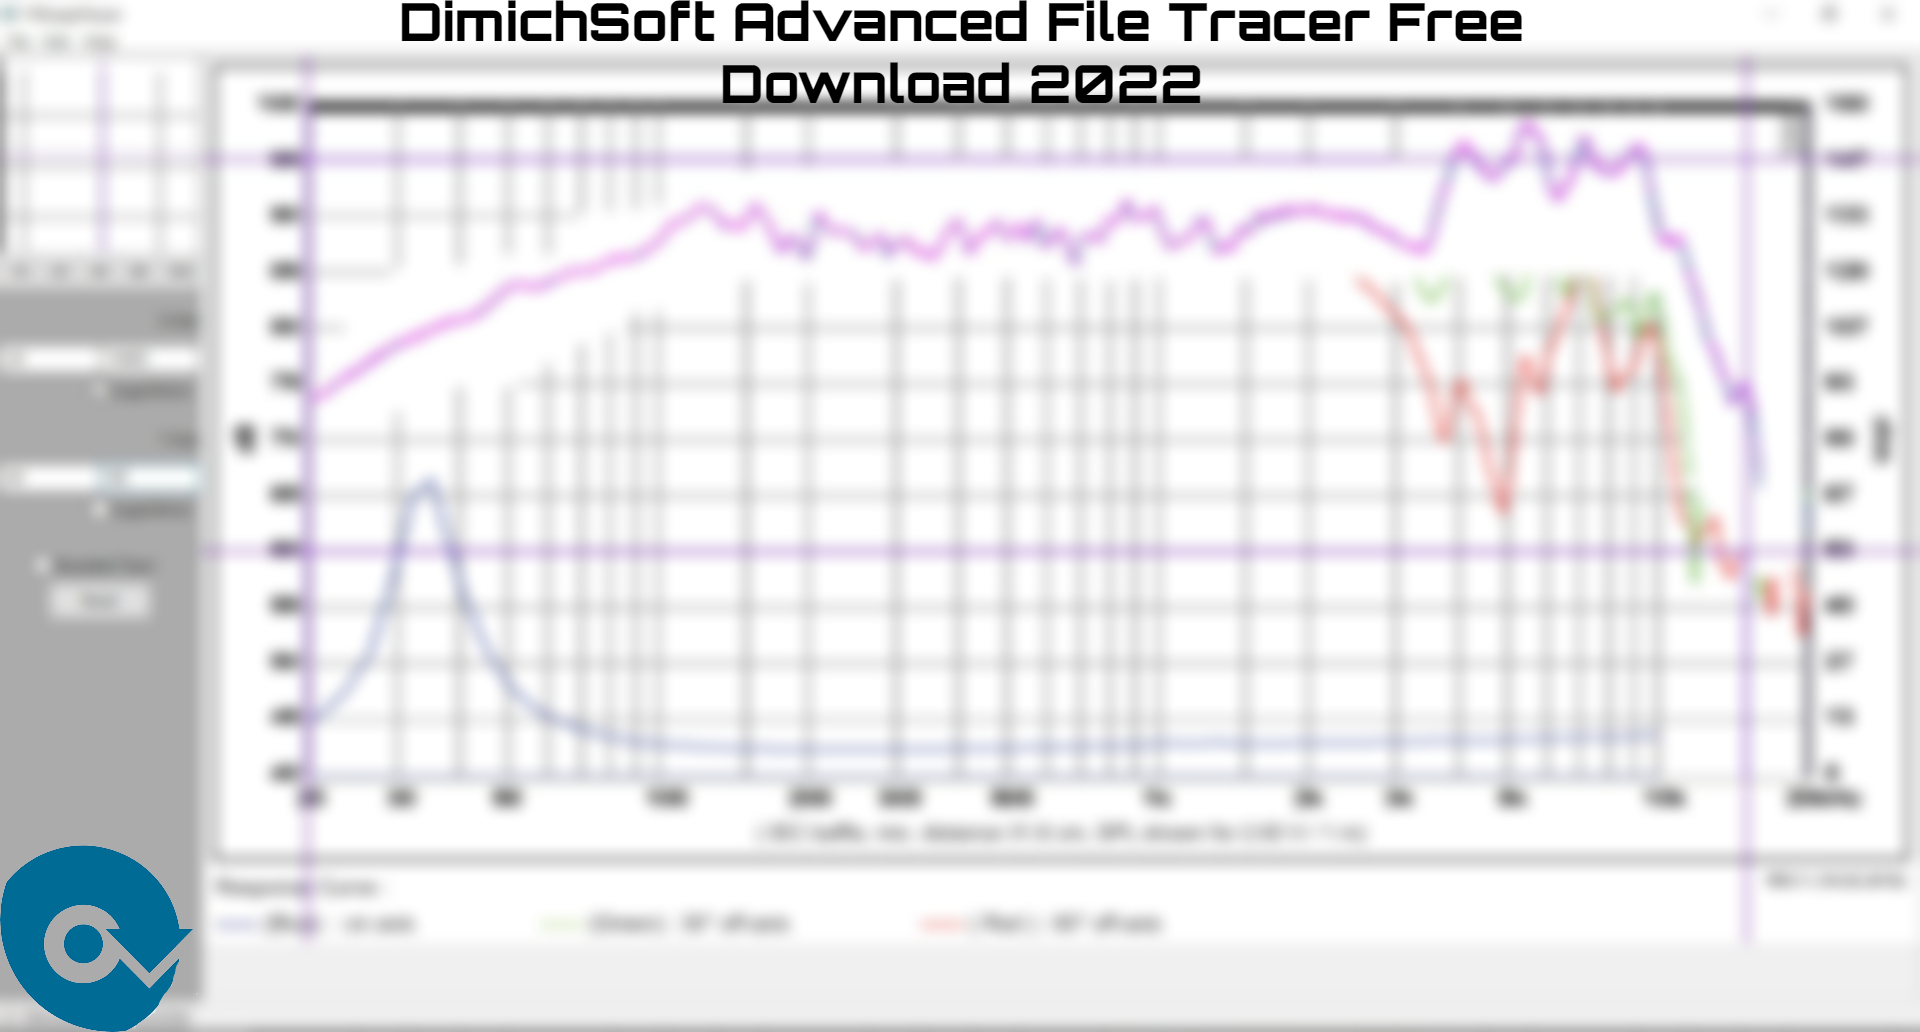 You are currently viewing DimichSoft Advanced File Tracer Free Download 2022